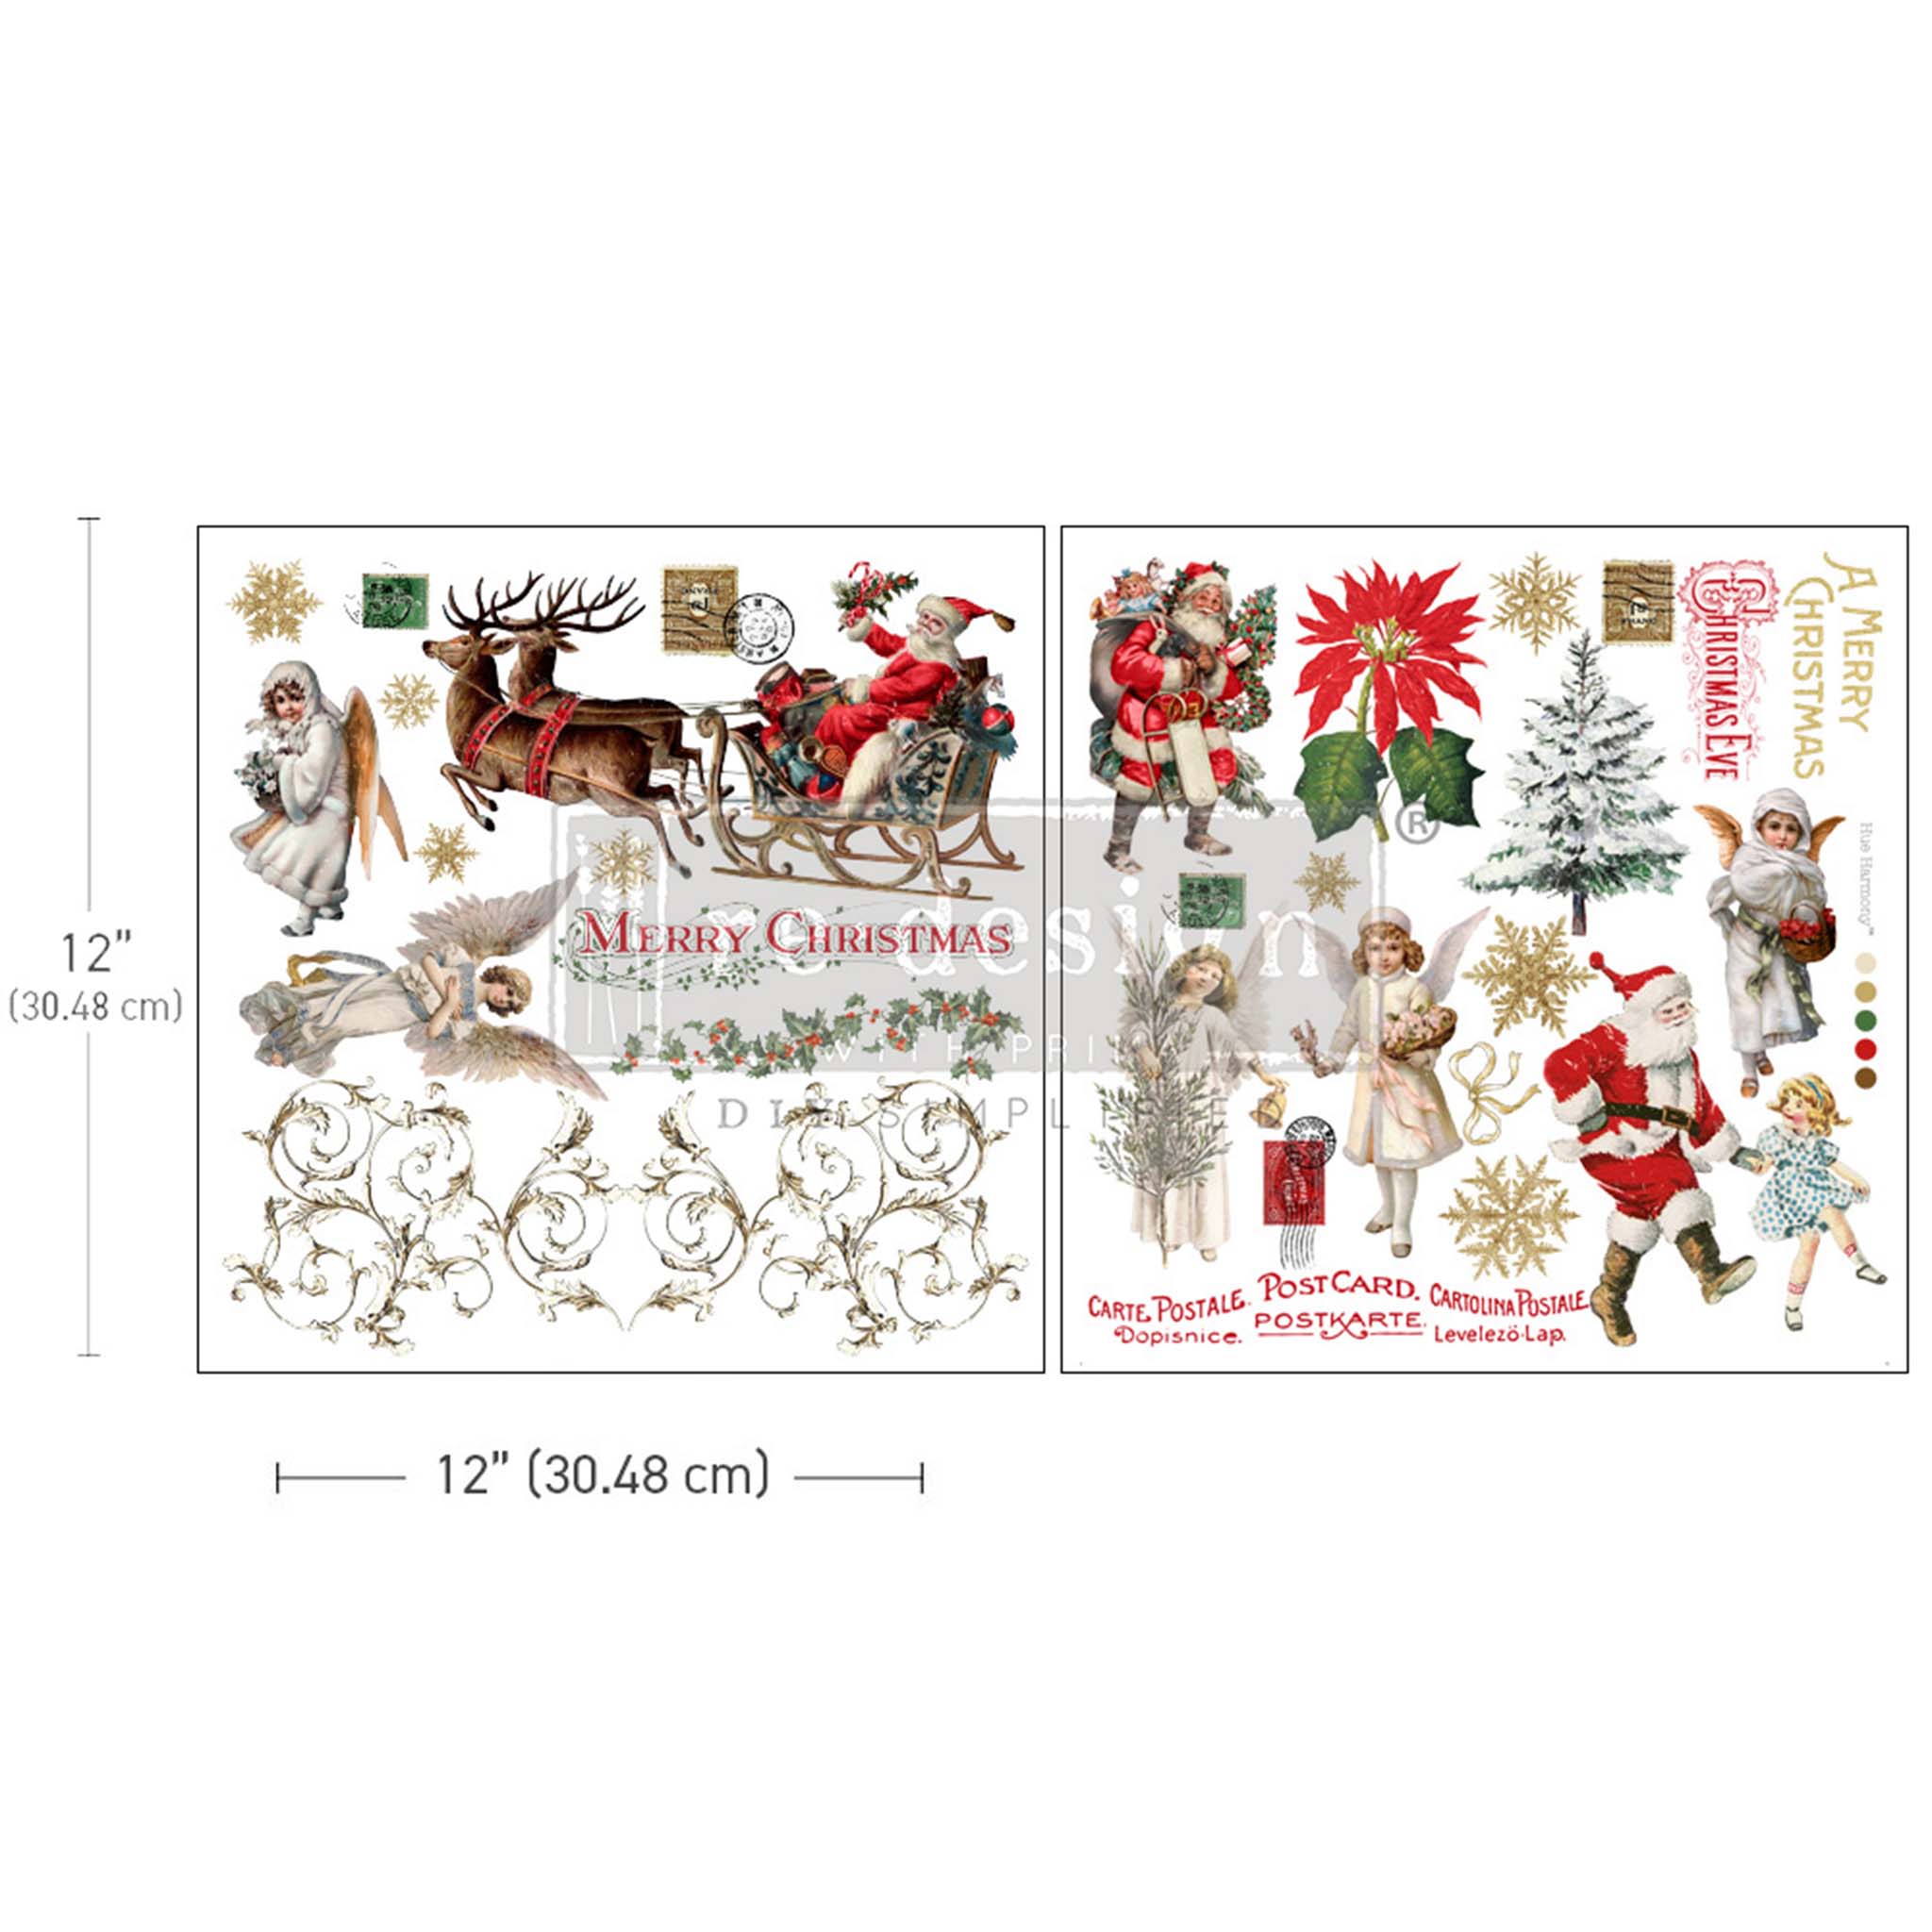 Two sheets of ReDesign with Prima's Holiday Traditions transfer are against a white background. Measurements for 1 sheet reads: 12" [30.48 cm] by 12" [30.48 cm].